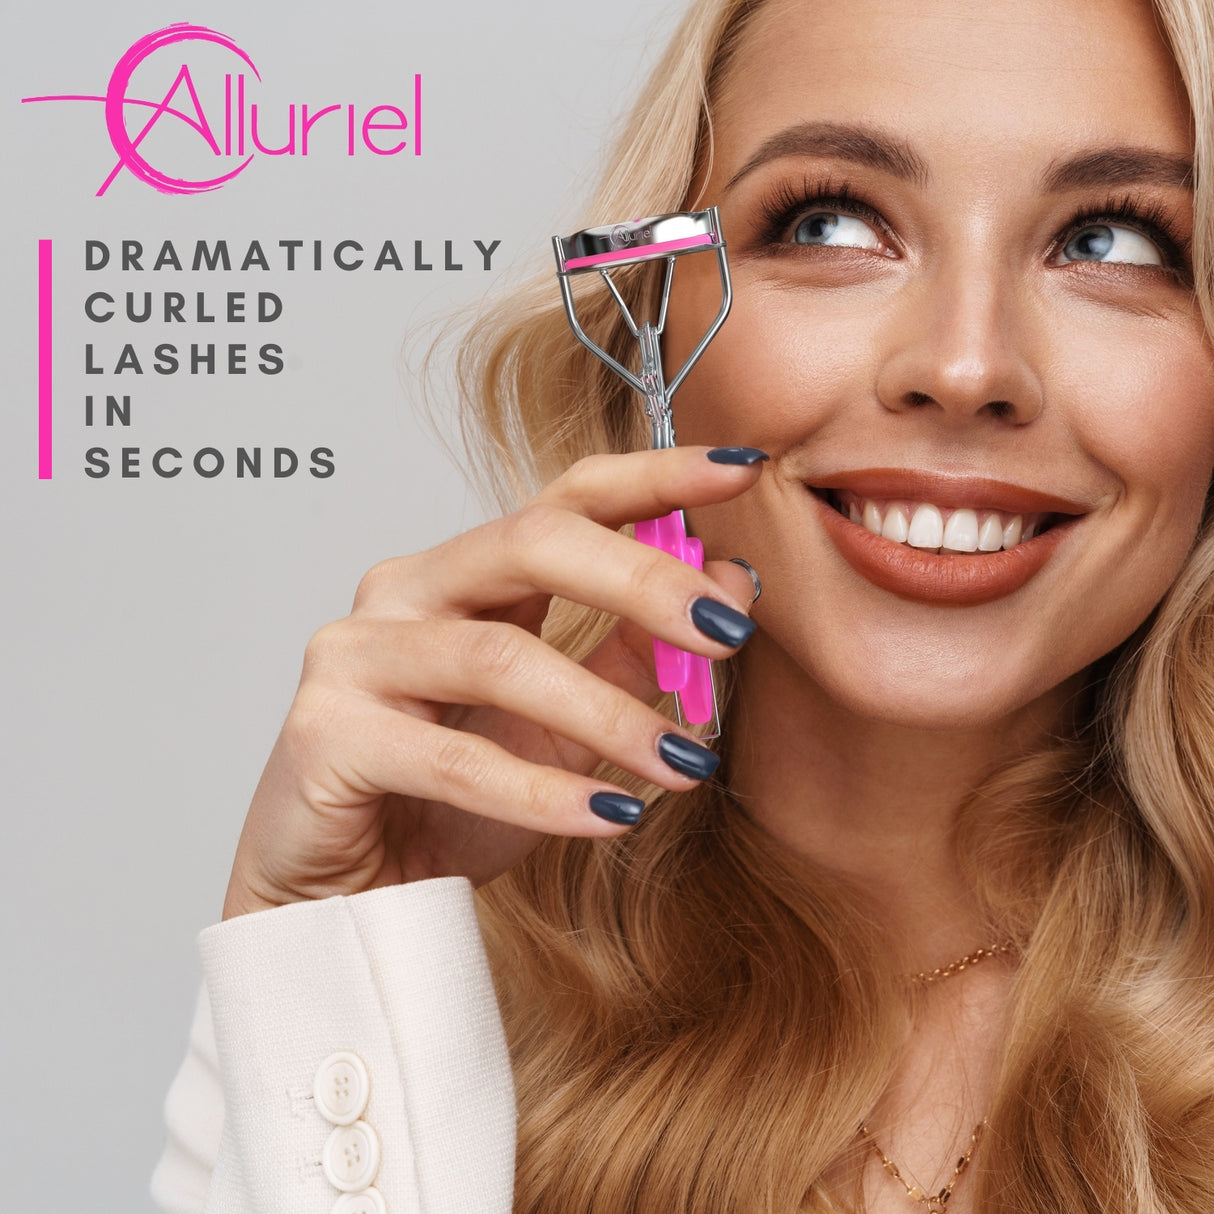 AllURIEL Deluxe Eyelash Curler Gift Set, Complete with Extra Refill Pads & Travel Case